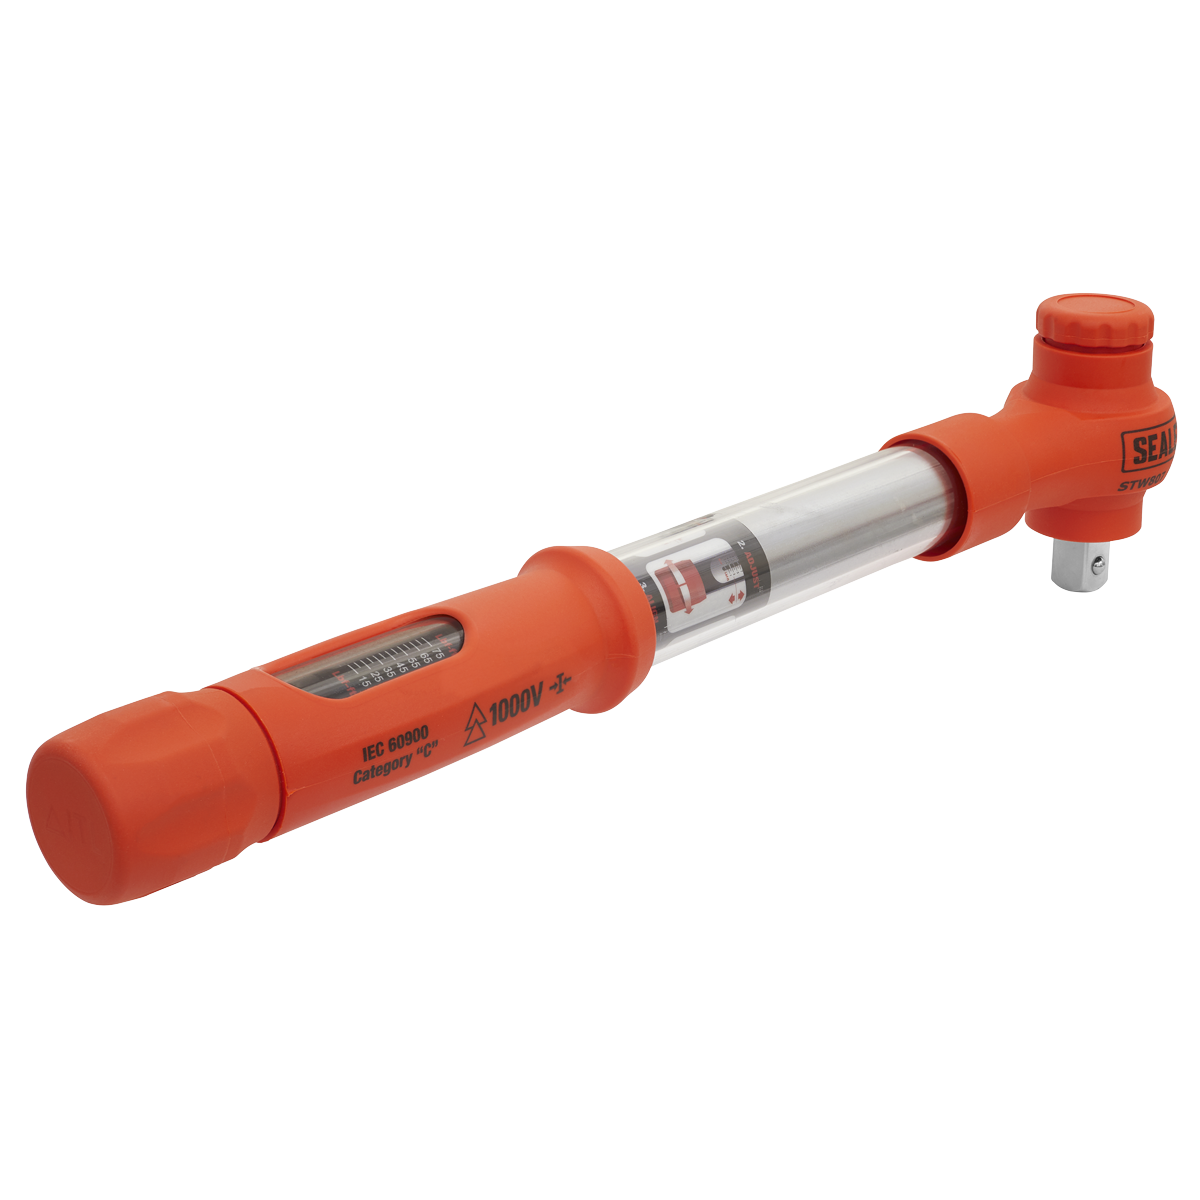 Sealey premier torque wrench